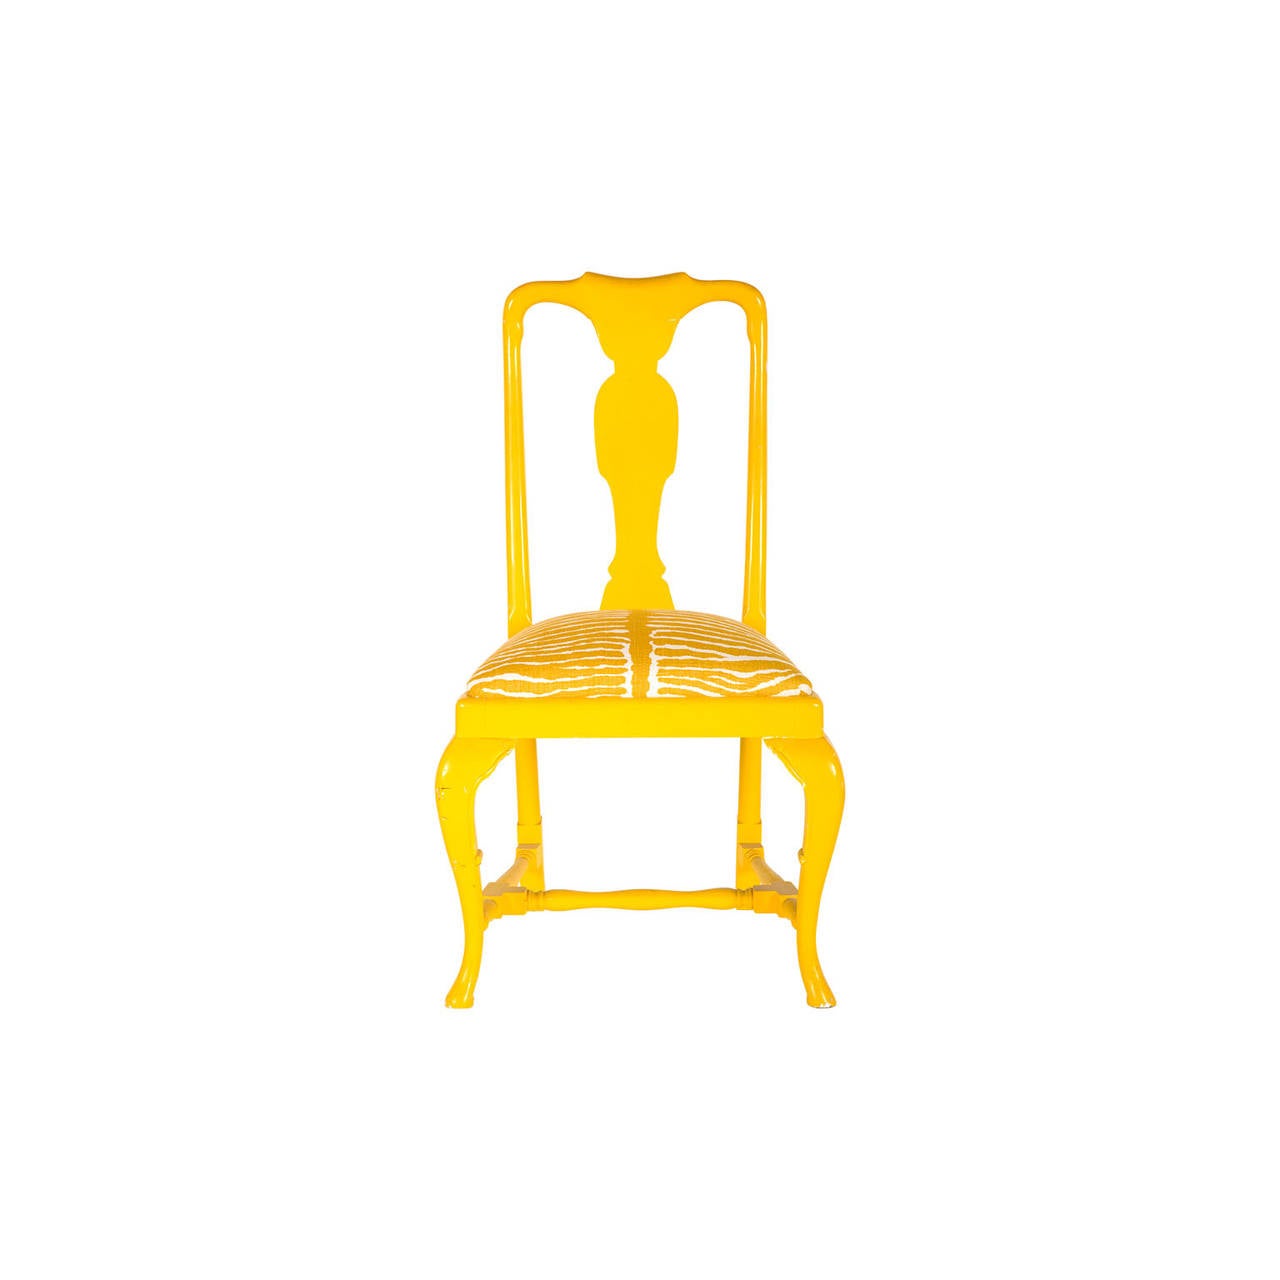 vintage queen anne dining chair. yellow painted finish as found. reupholstered in brunschwig & fils saffron le zebre linen. set of four available (priced individually).